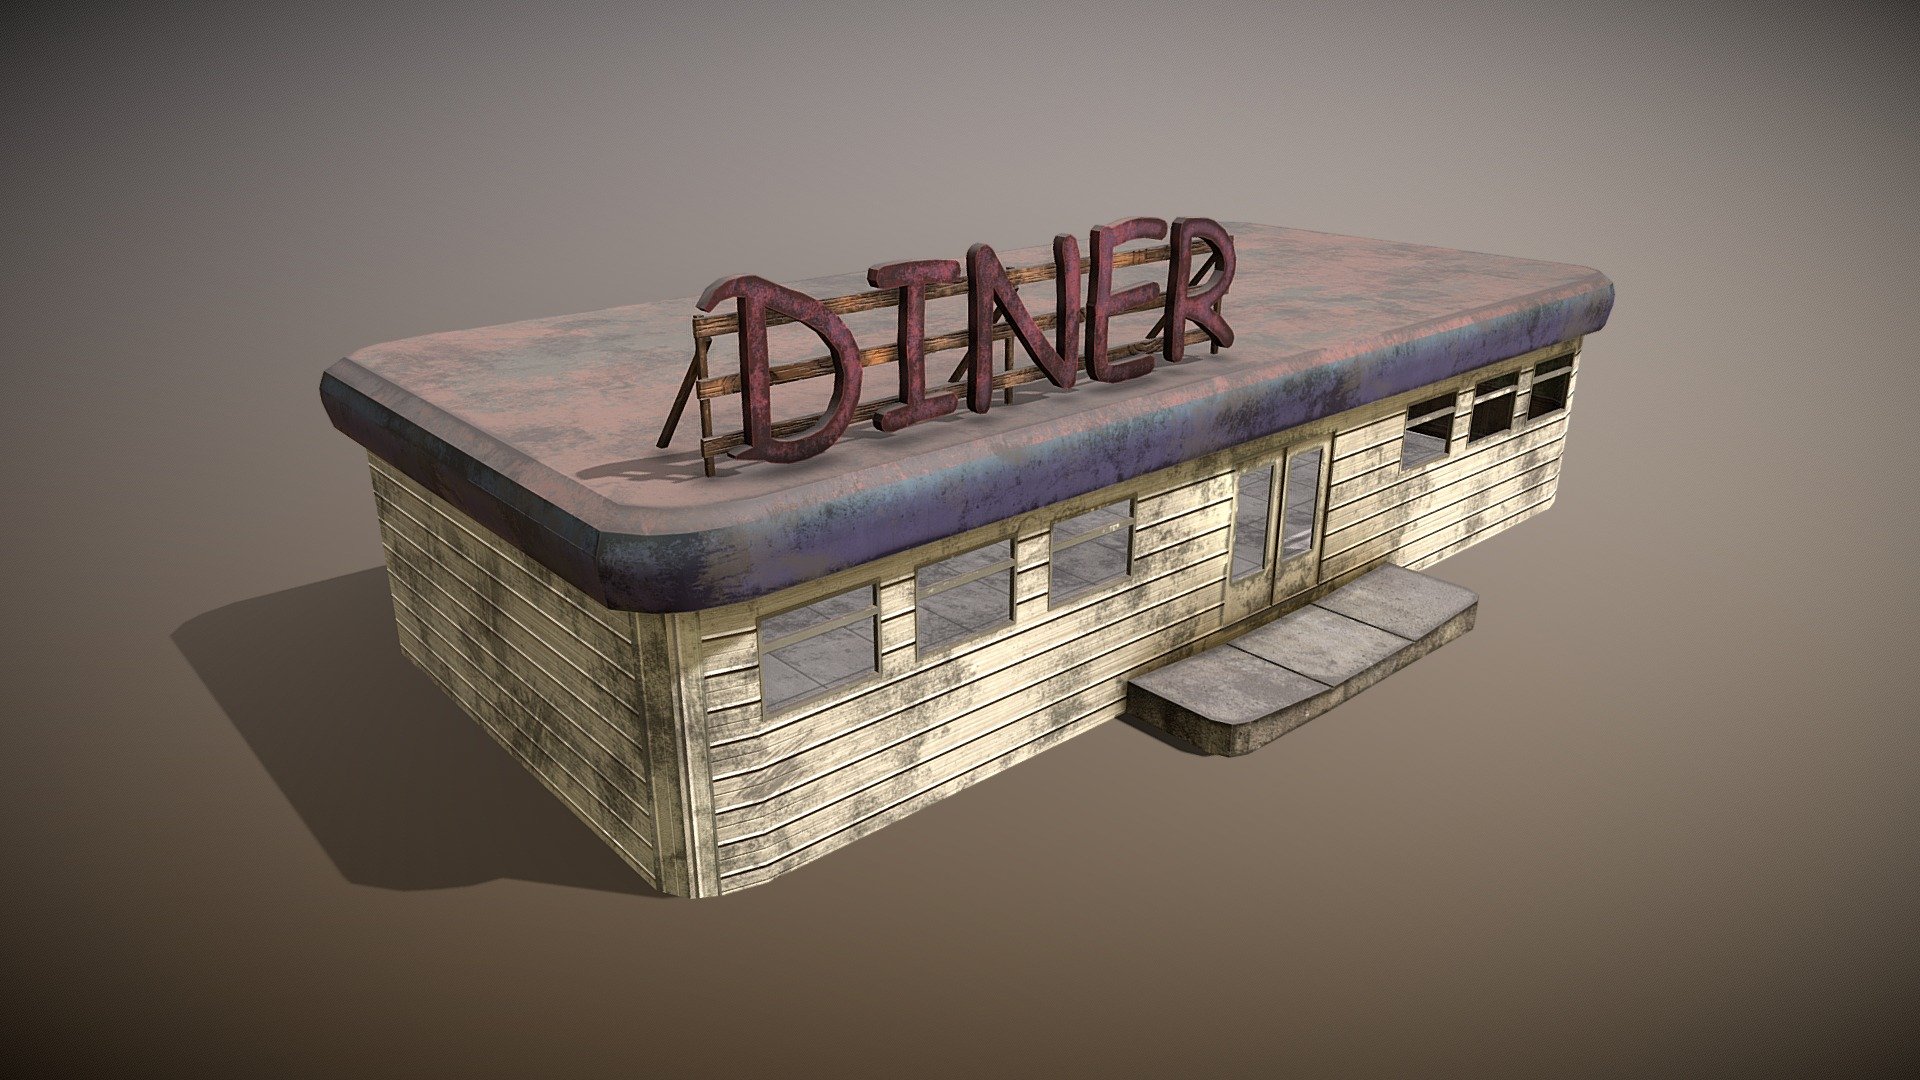 4096 pbr material with Dx normalmap, extra zip with objects set on pivot so it is easy to set out, doors made so they can be interacted with, pivot on the side.. sign is also loose in the extra zip so you may change the sign with something of your own if you want to reuse the diner mesh.
material could prob go down to 2048 and still look good.I did not put in windows this time so you may use custom plane with custom material. 3d model